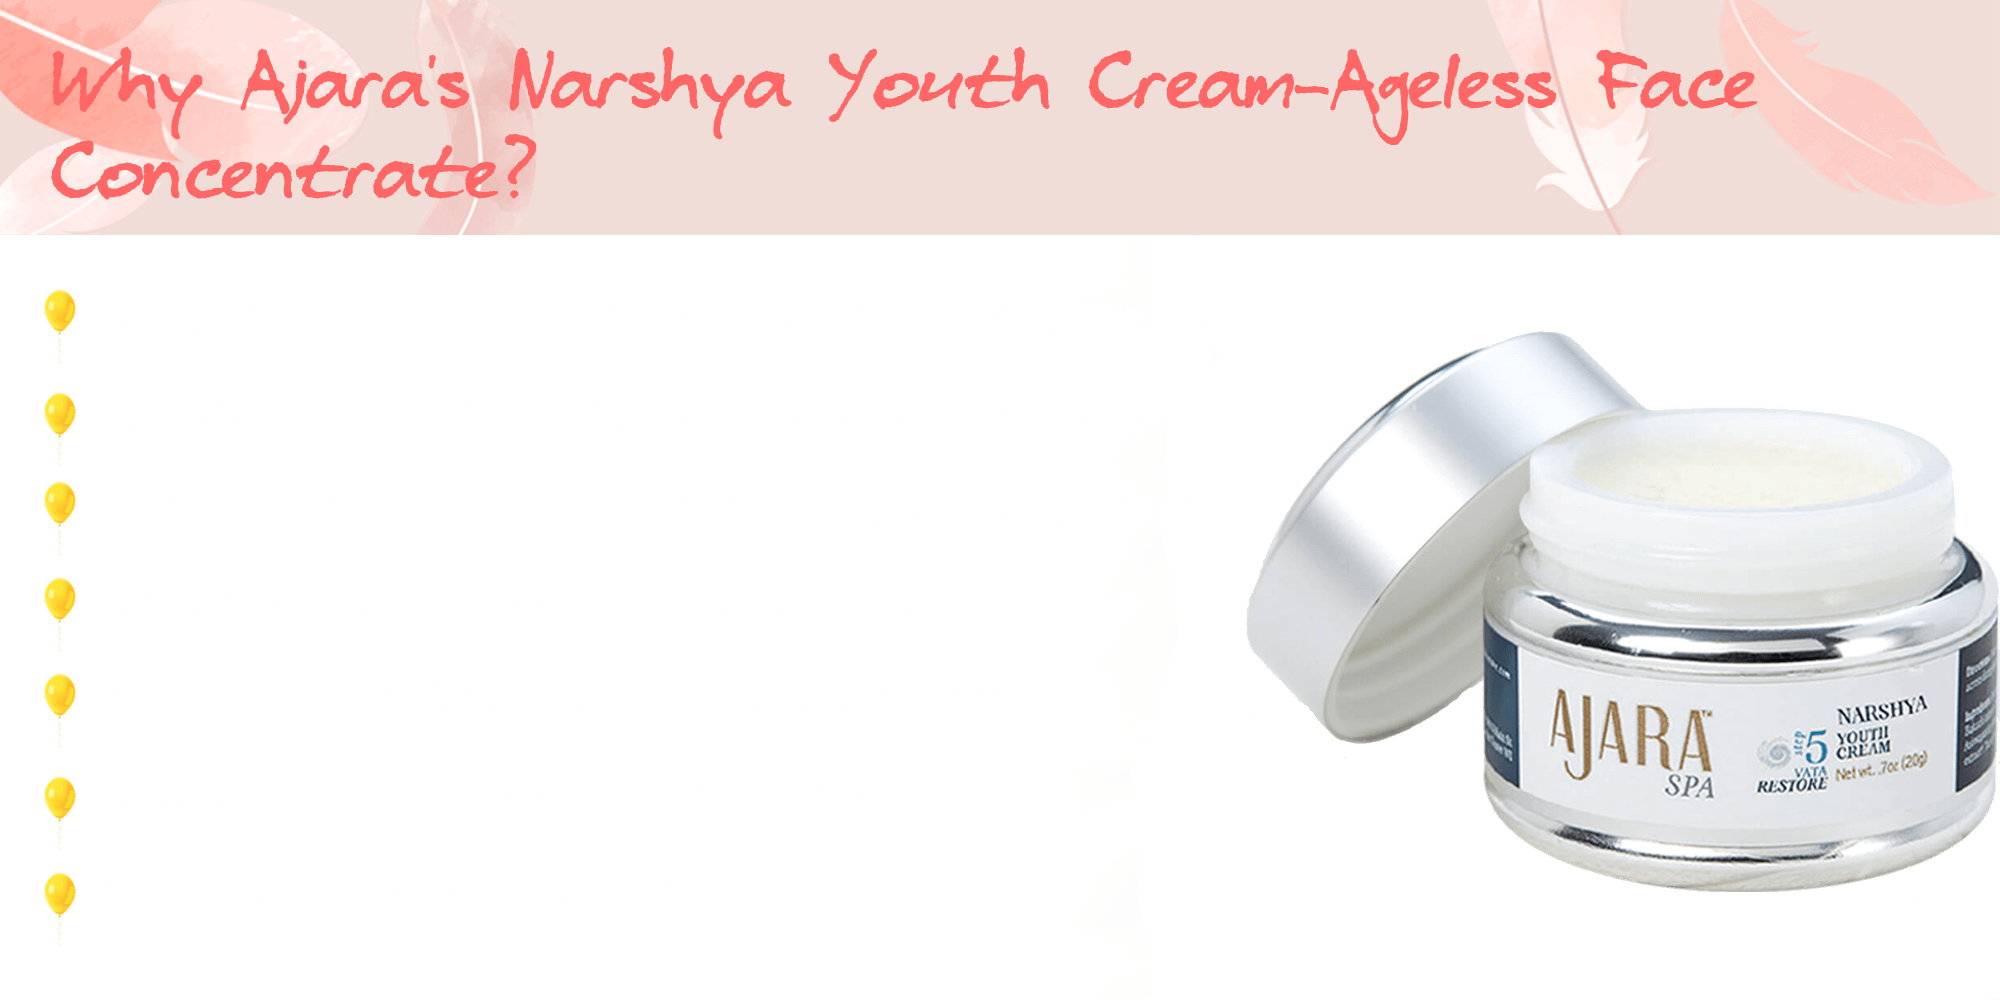 Narshya Youth Cream - What makes it a one-of-a-kind?